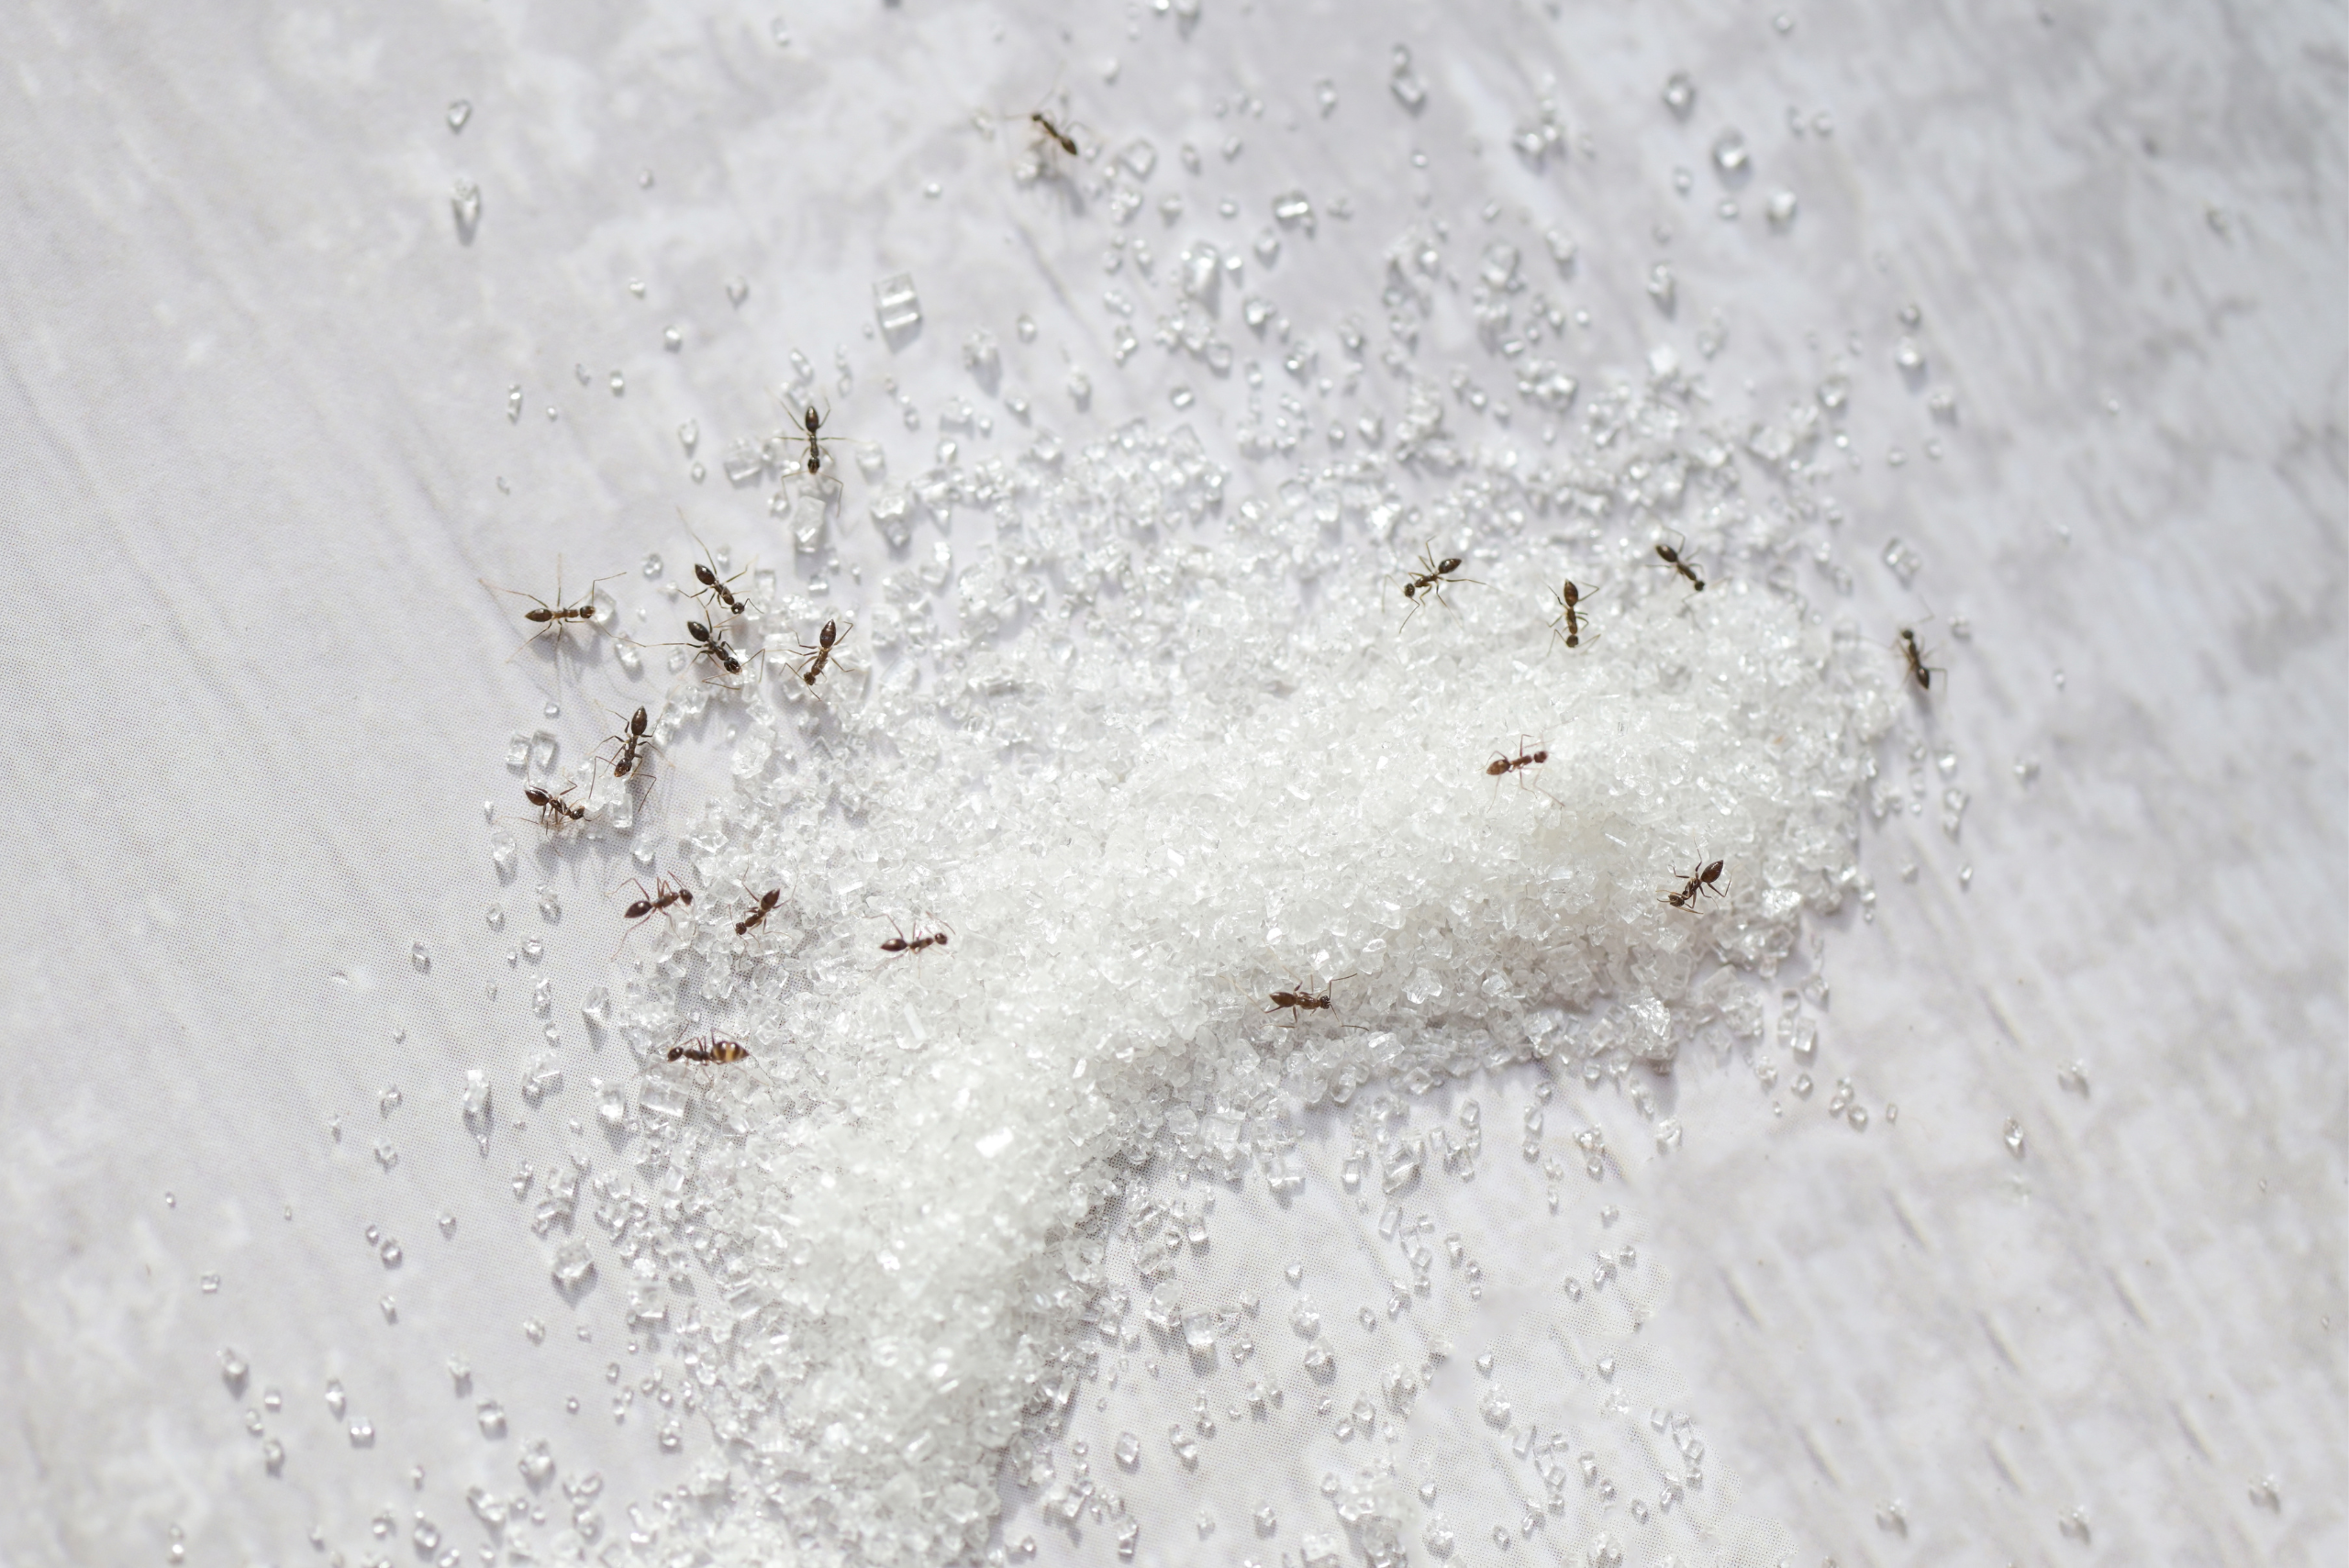 Ants on top of a mountain of sugar.